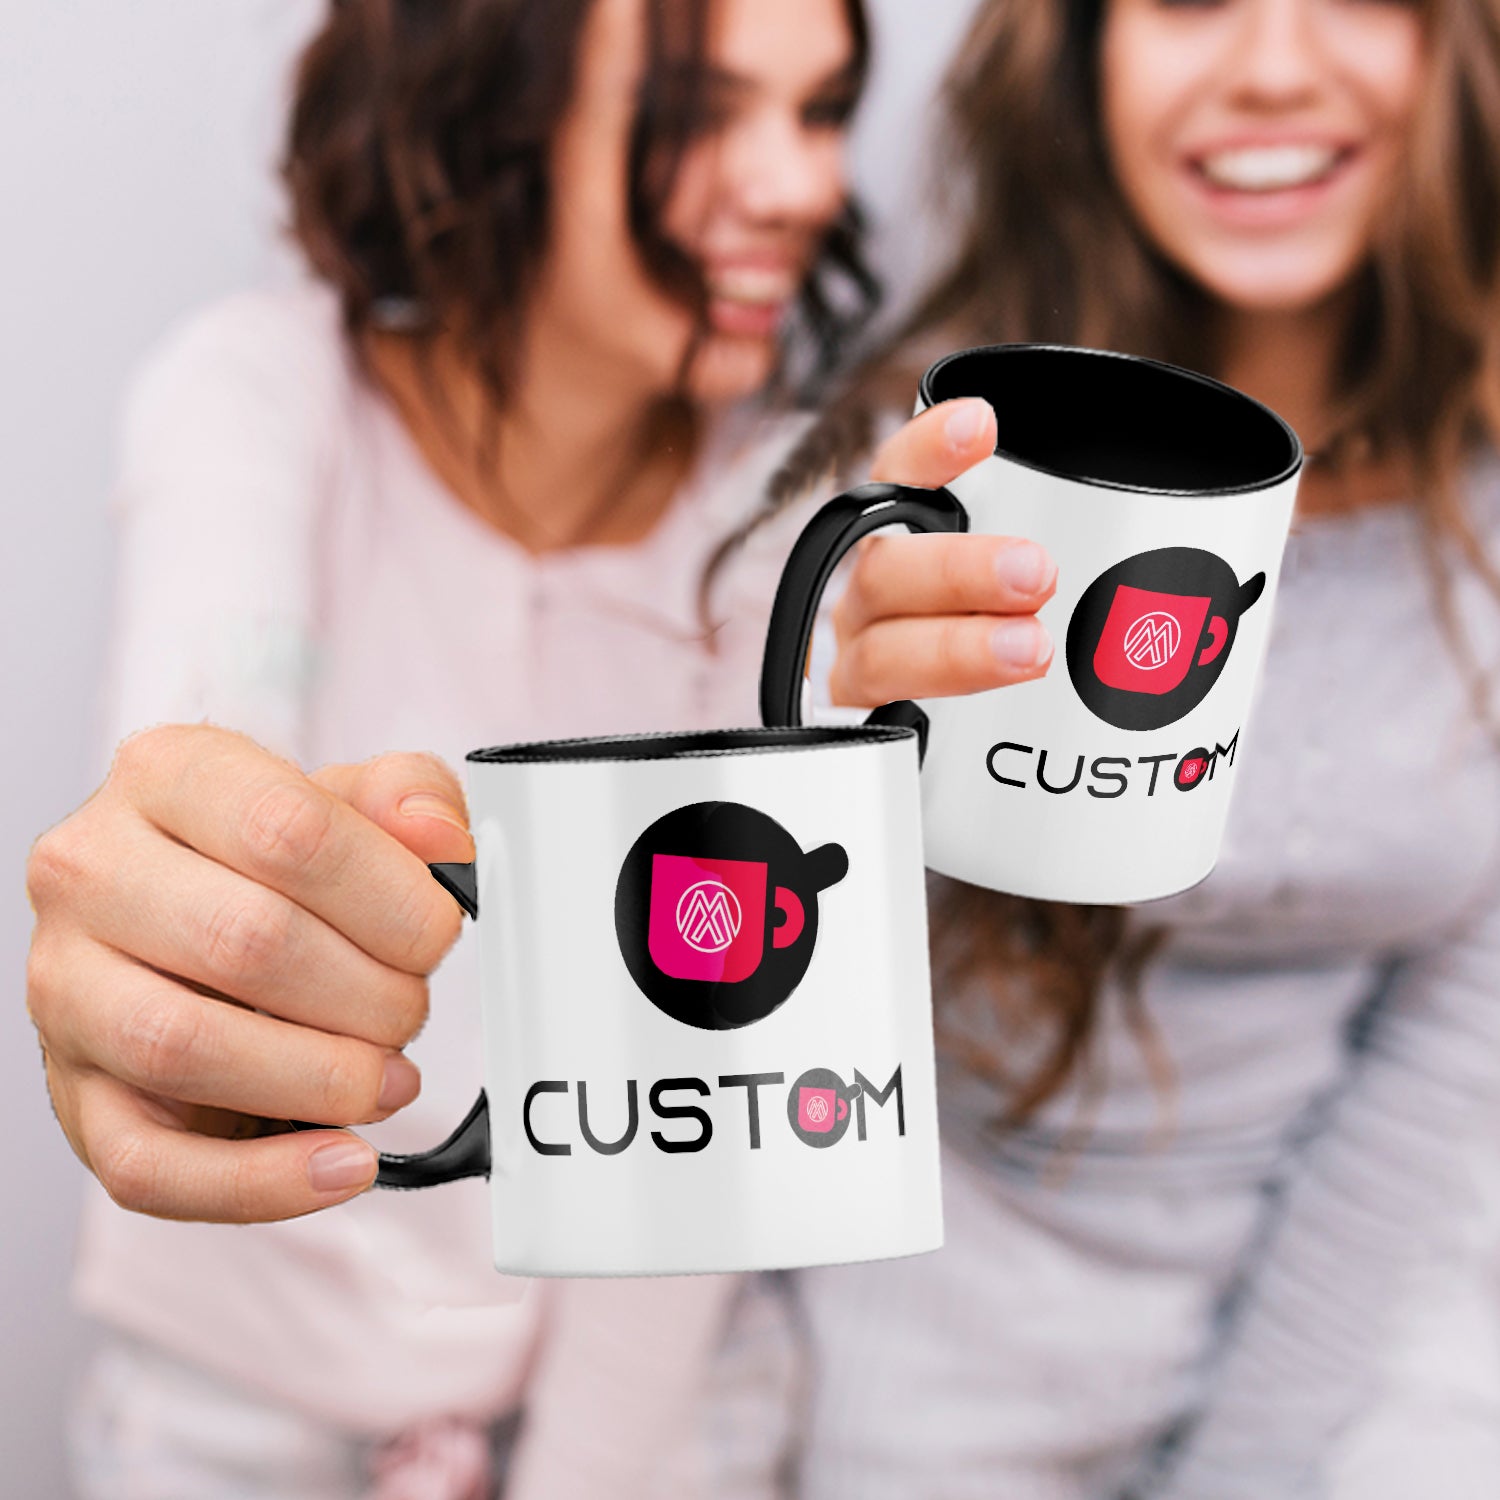 Customized Sublimation Mugs: Corporate or Personal Gifts with a Personalized Touch